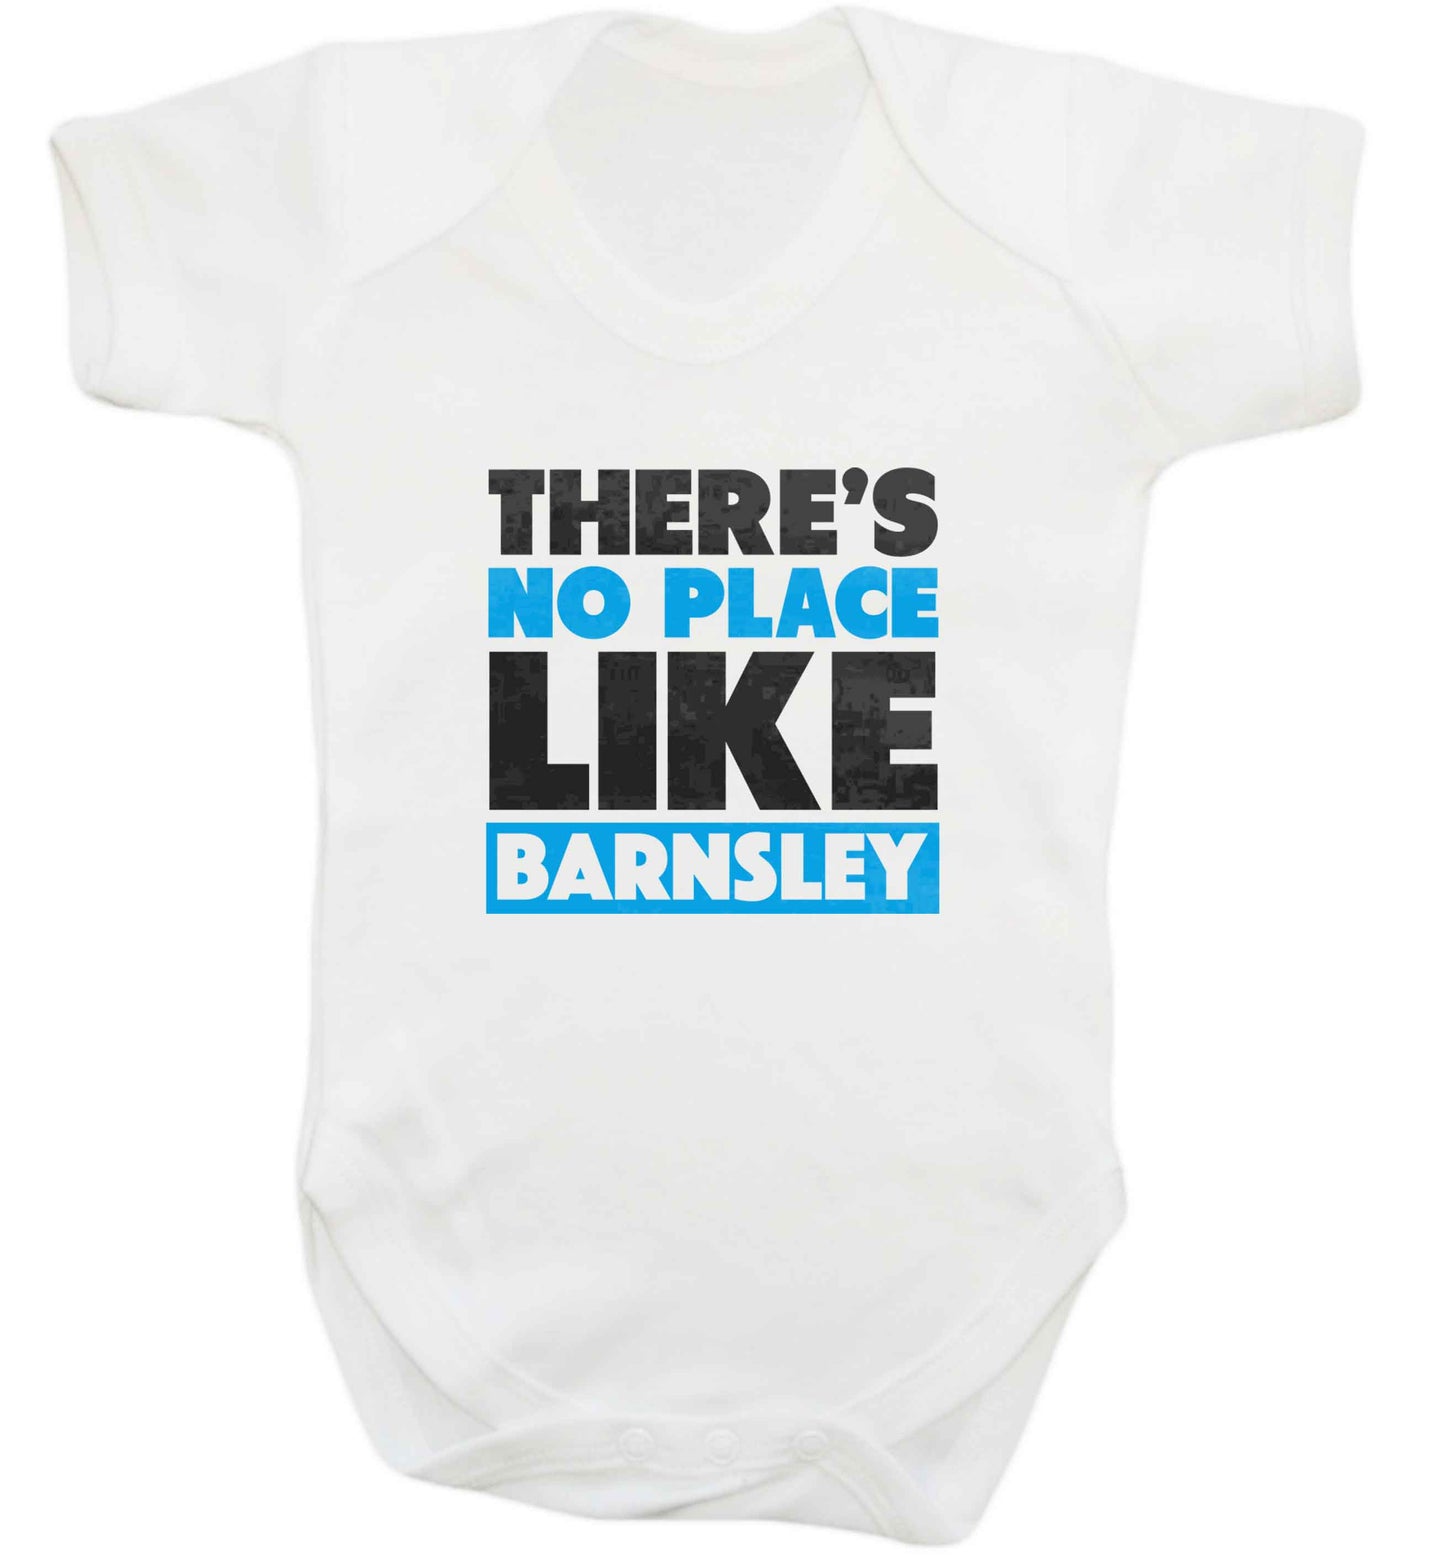 There's No Place Like Barnsley baby vest white 18-24 months